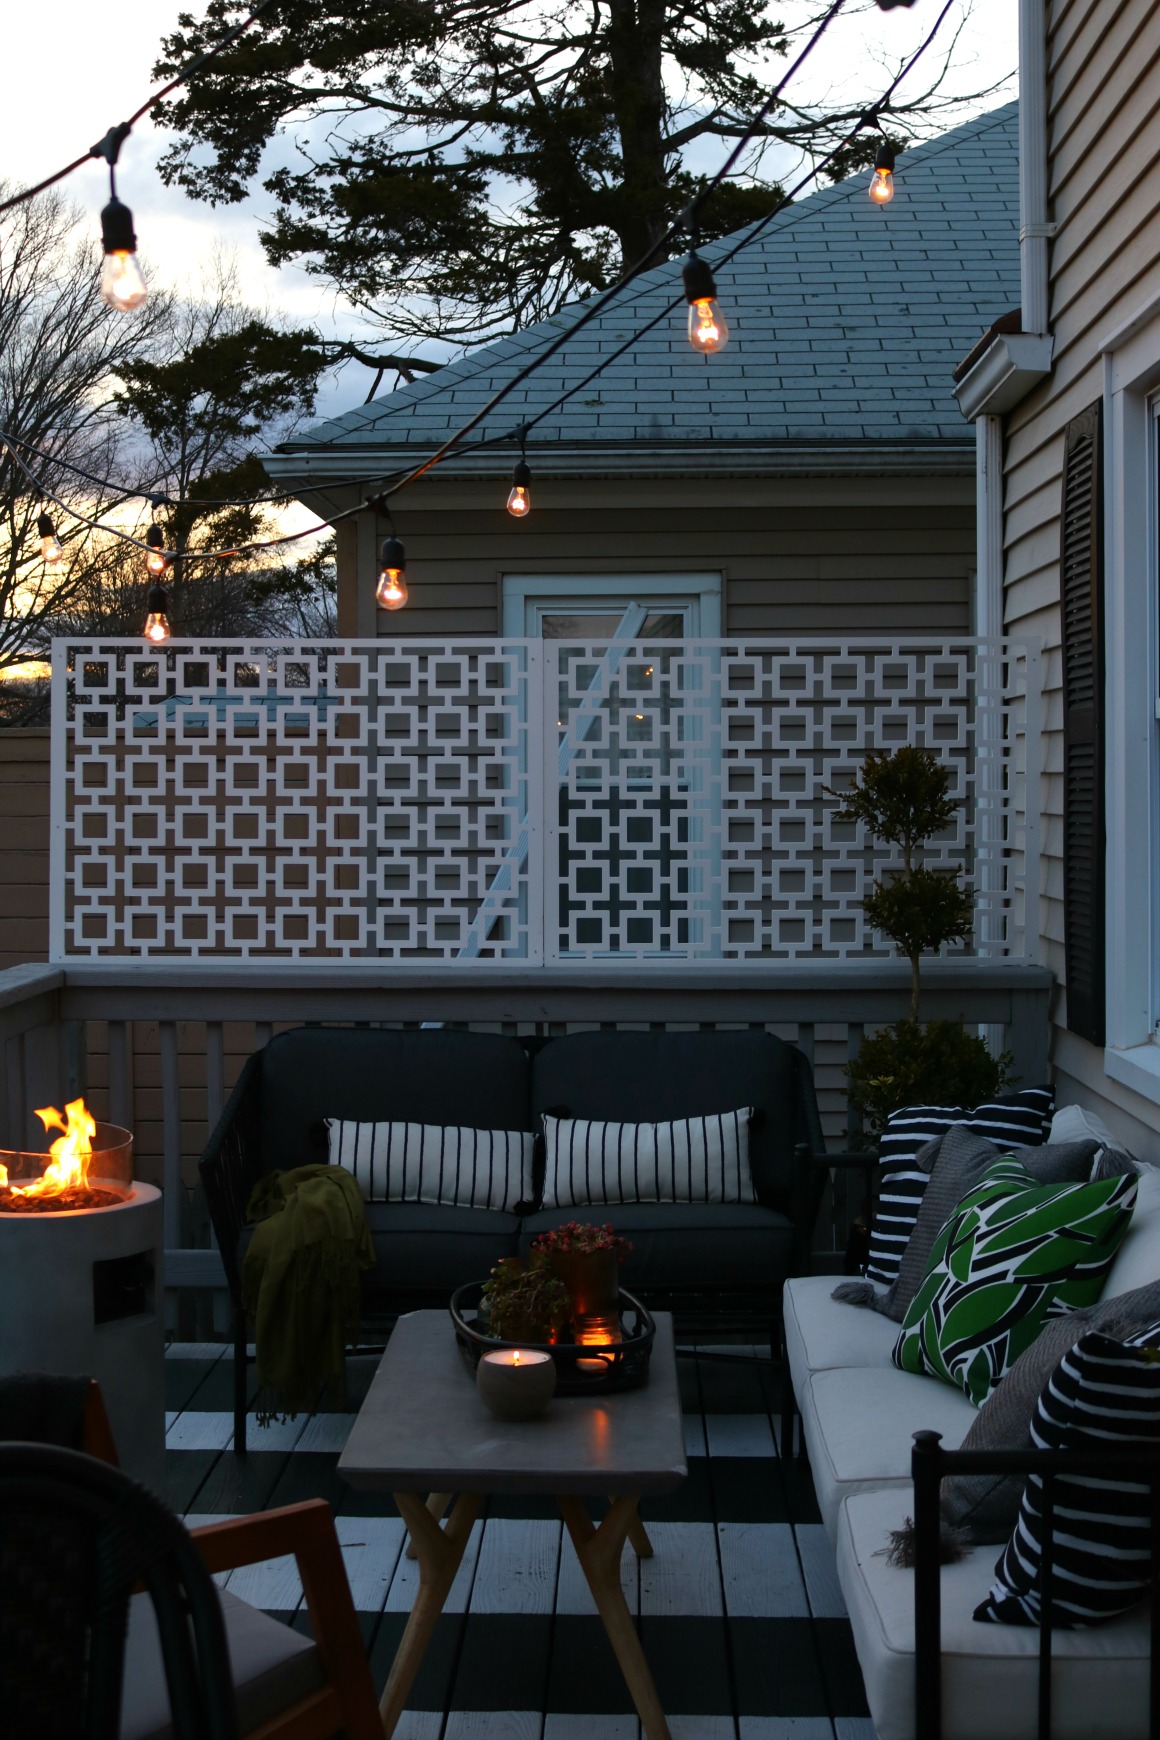 How to hang Outdoor Patio Lights and Privacy Screen